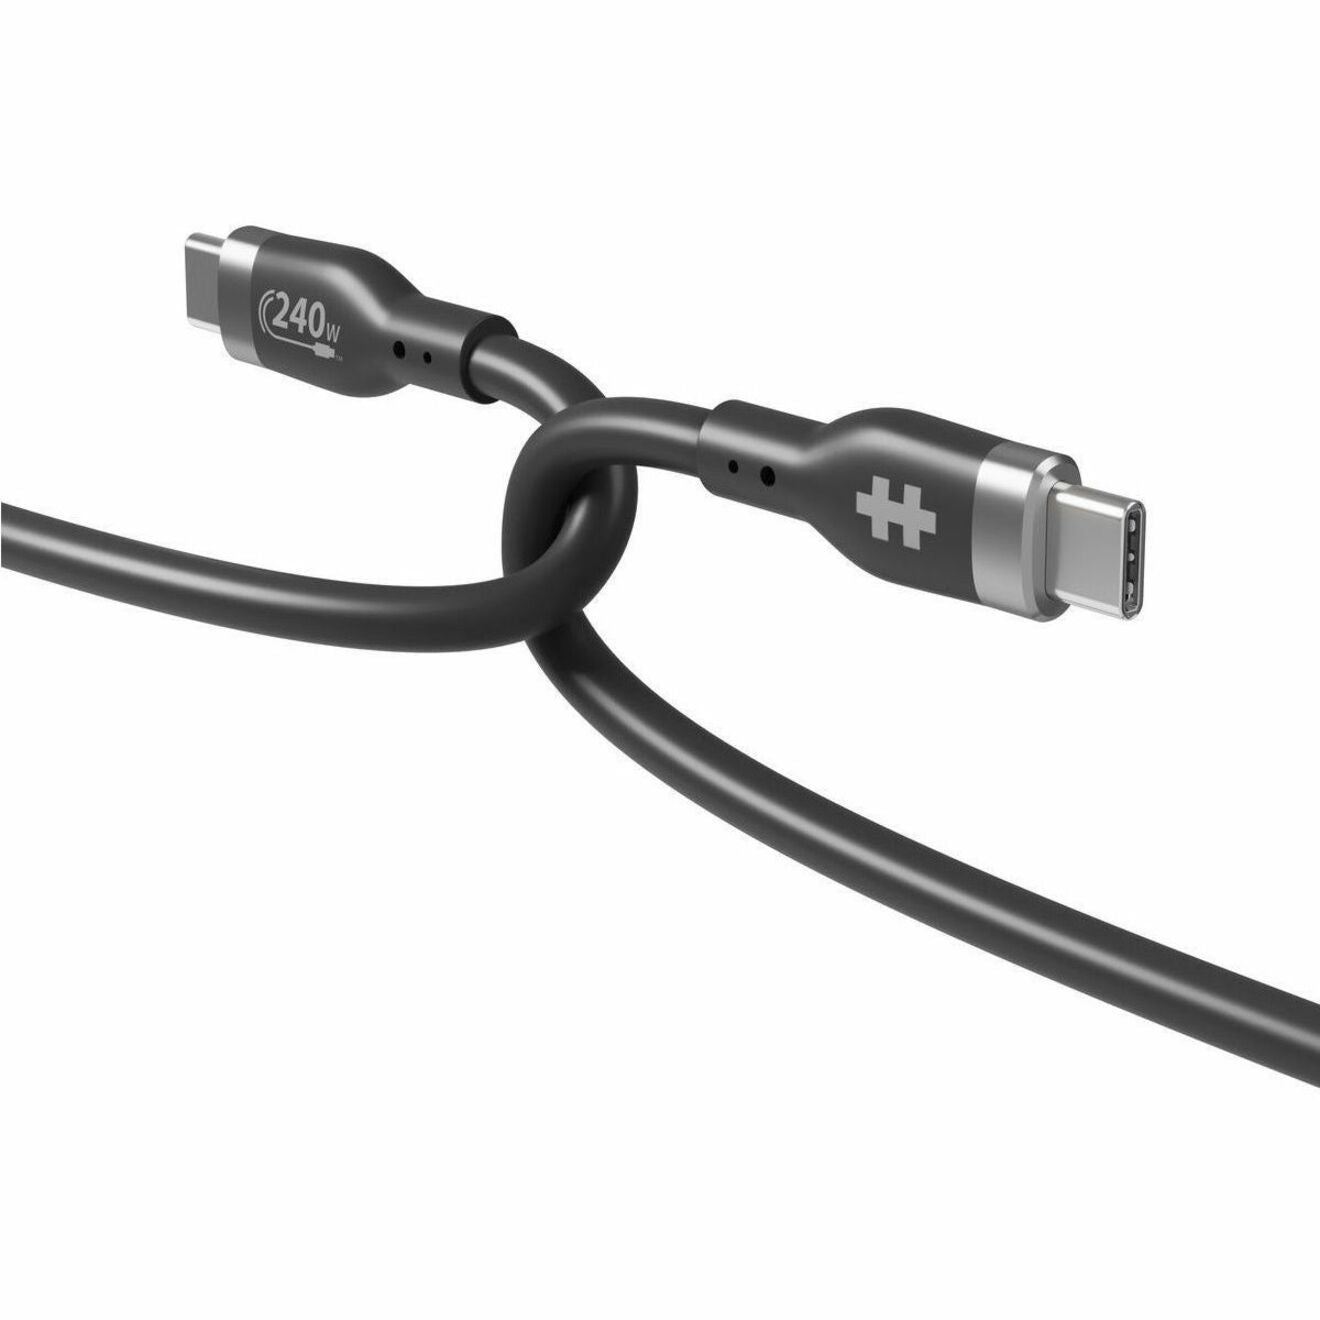 Targus Charging Cable - 3.28 ft Cord Length - USB Type C (HJ4001BKGL)